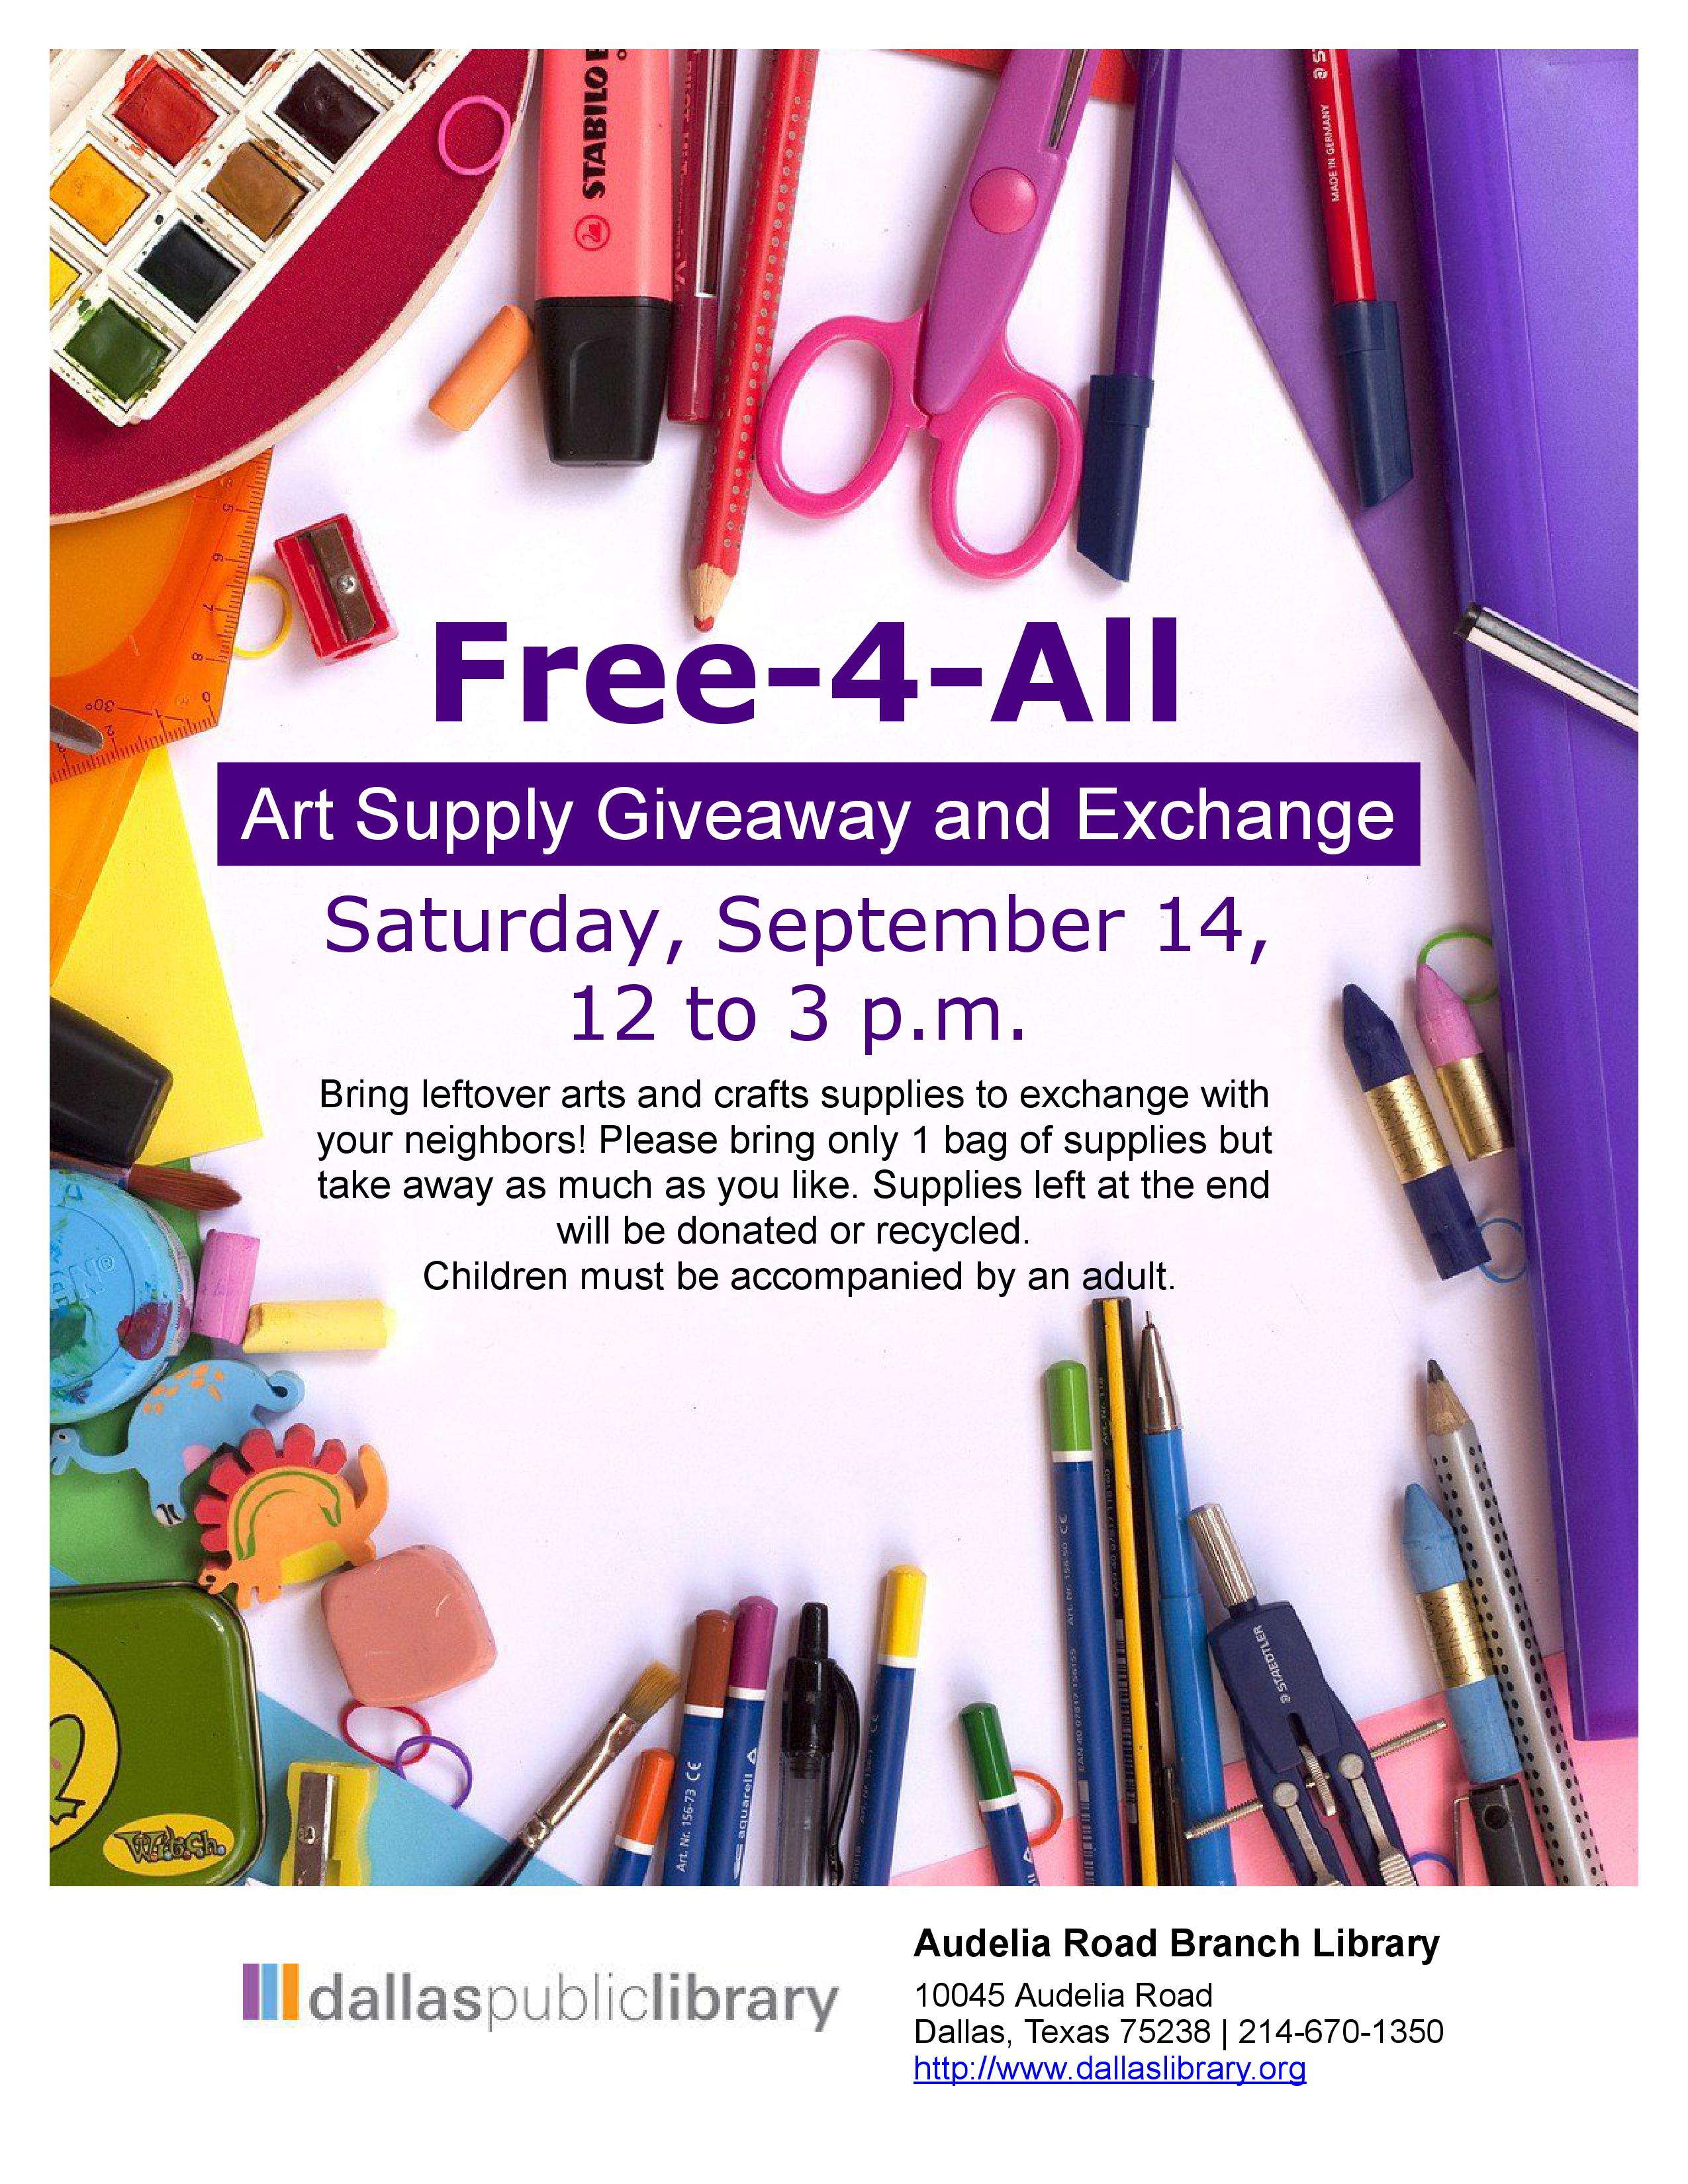 Free art supplies for crafters